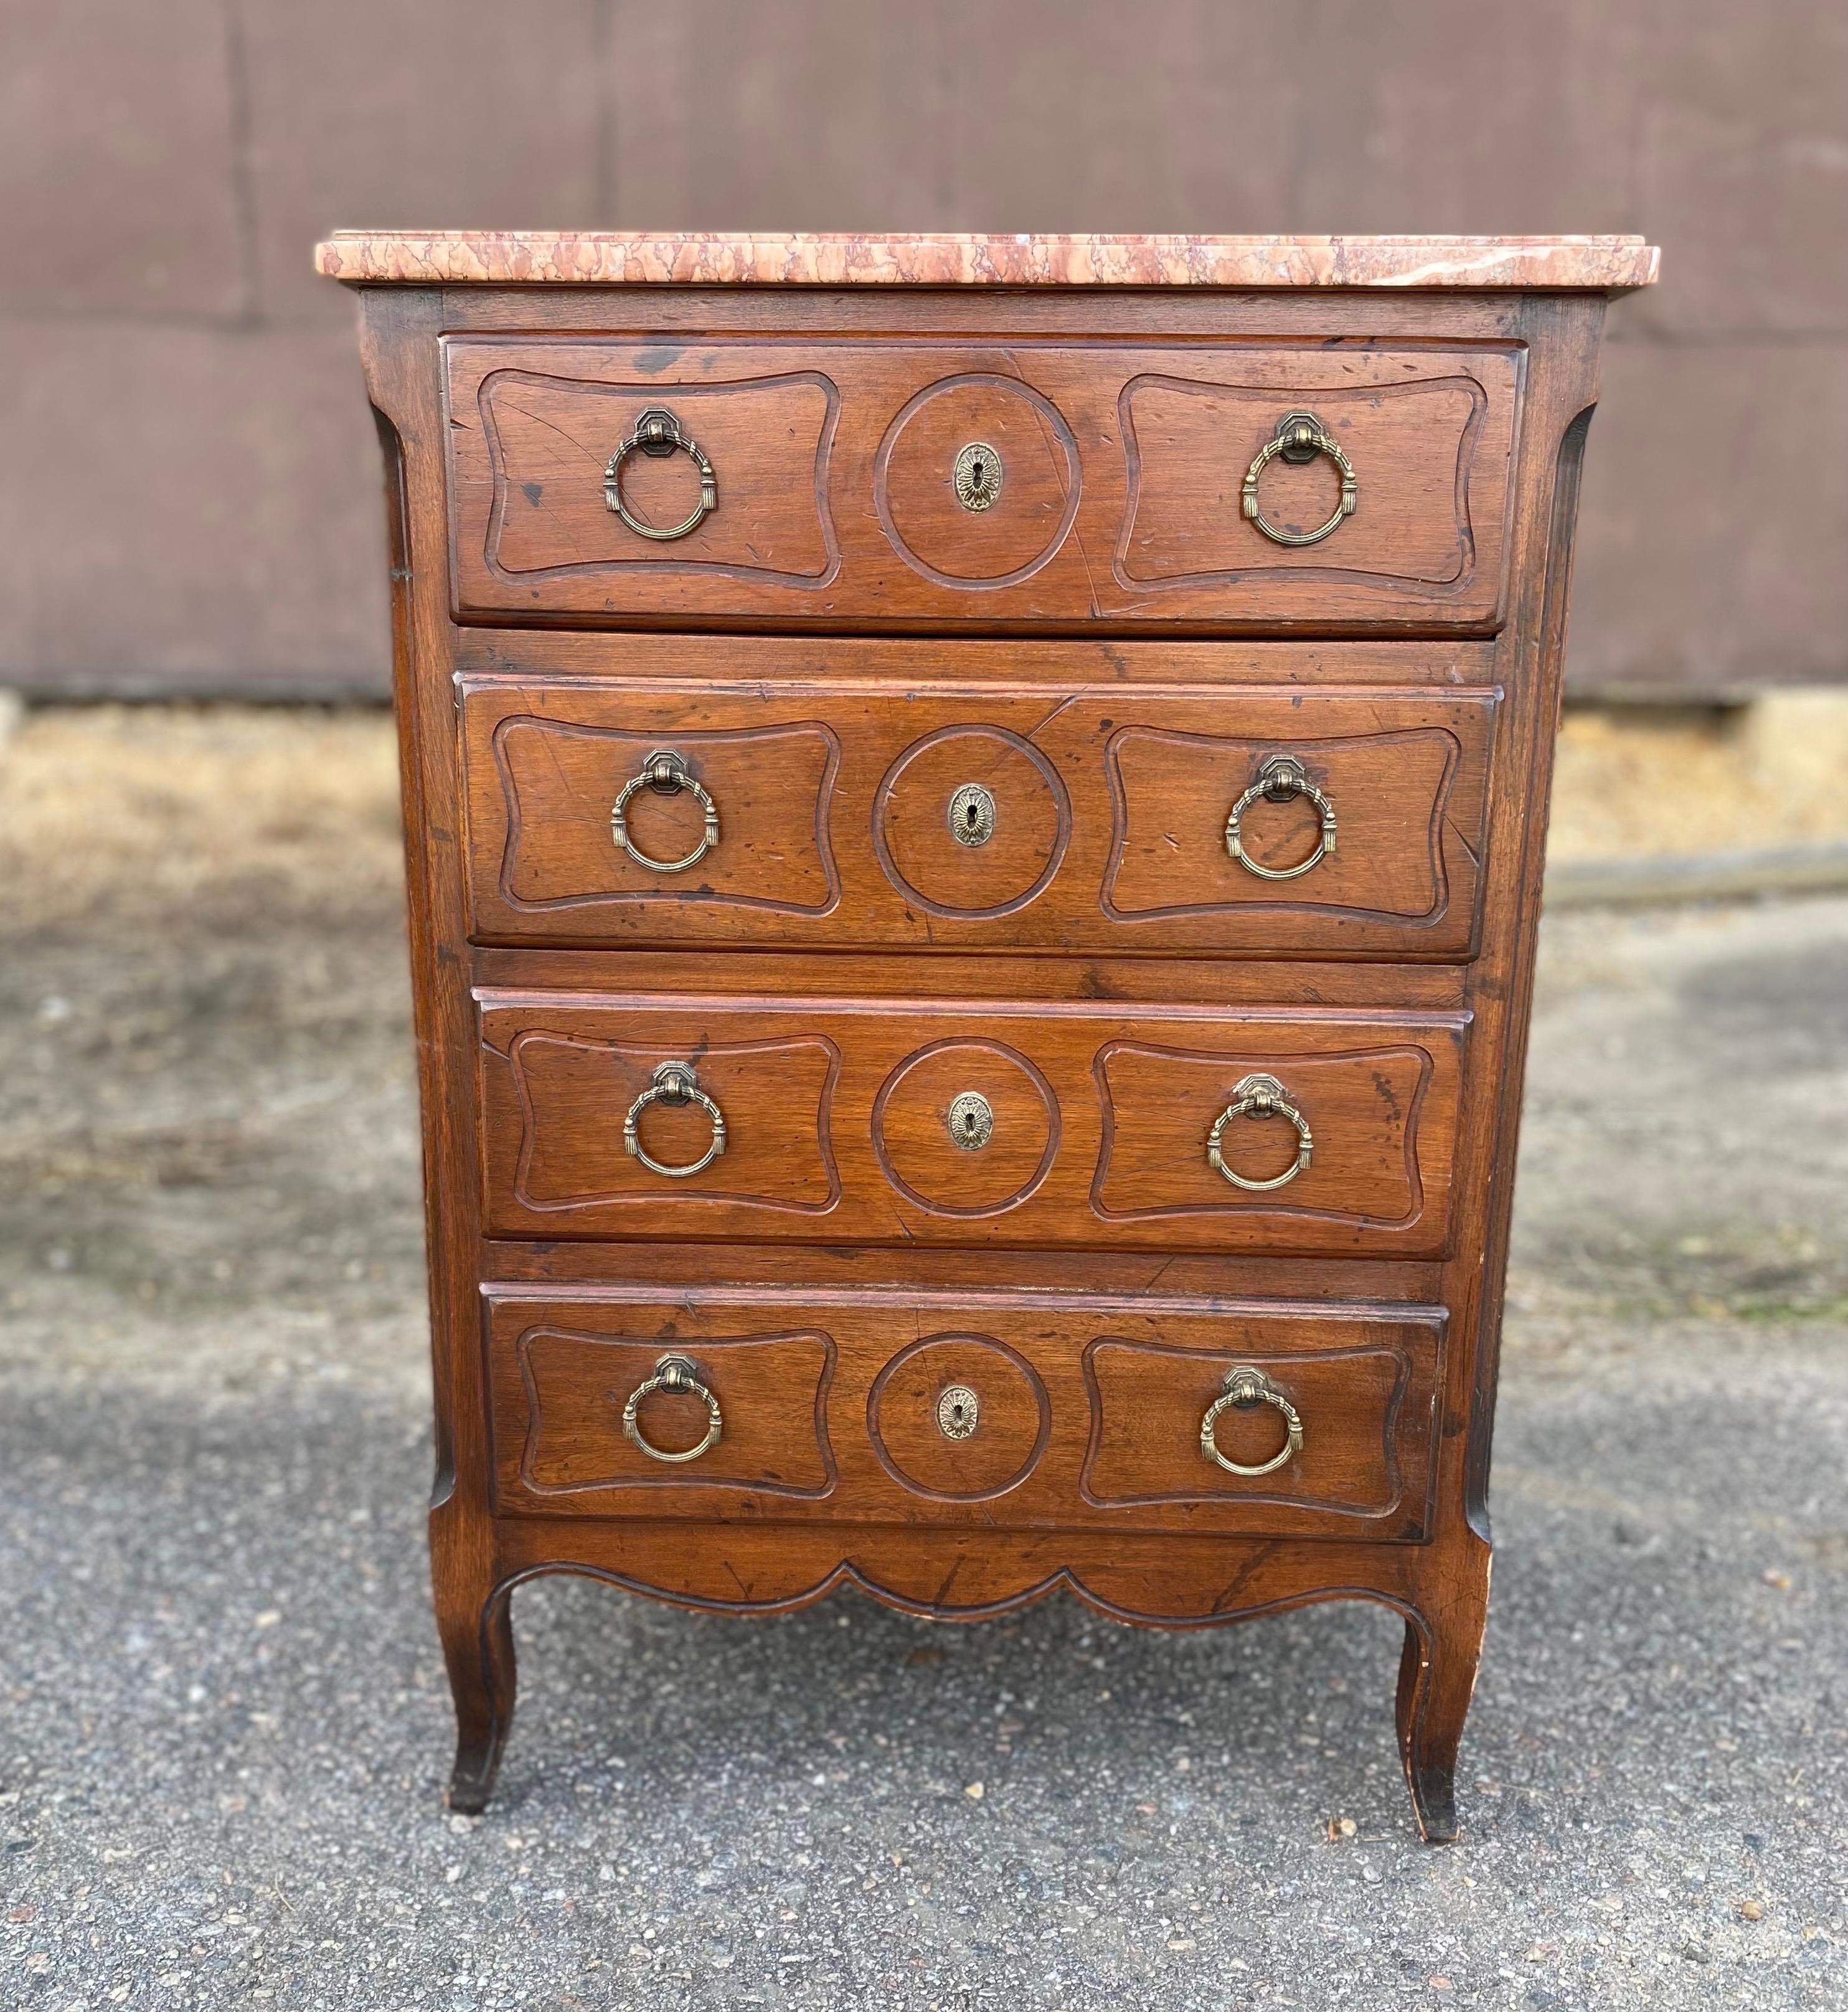 Great little 19th century French marble top chest with canter corners, shaped marble top and French feet. Great height and size for a bedside chest or side table.